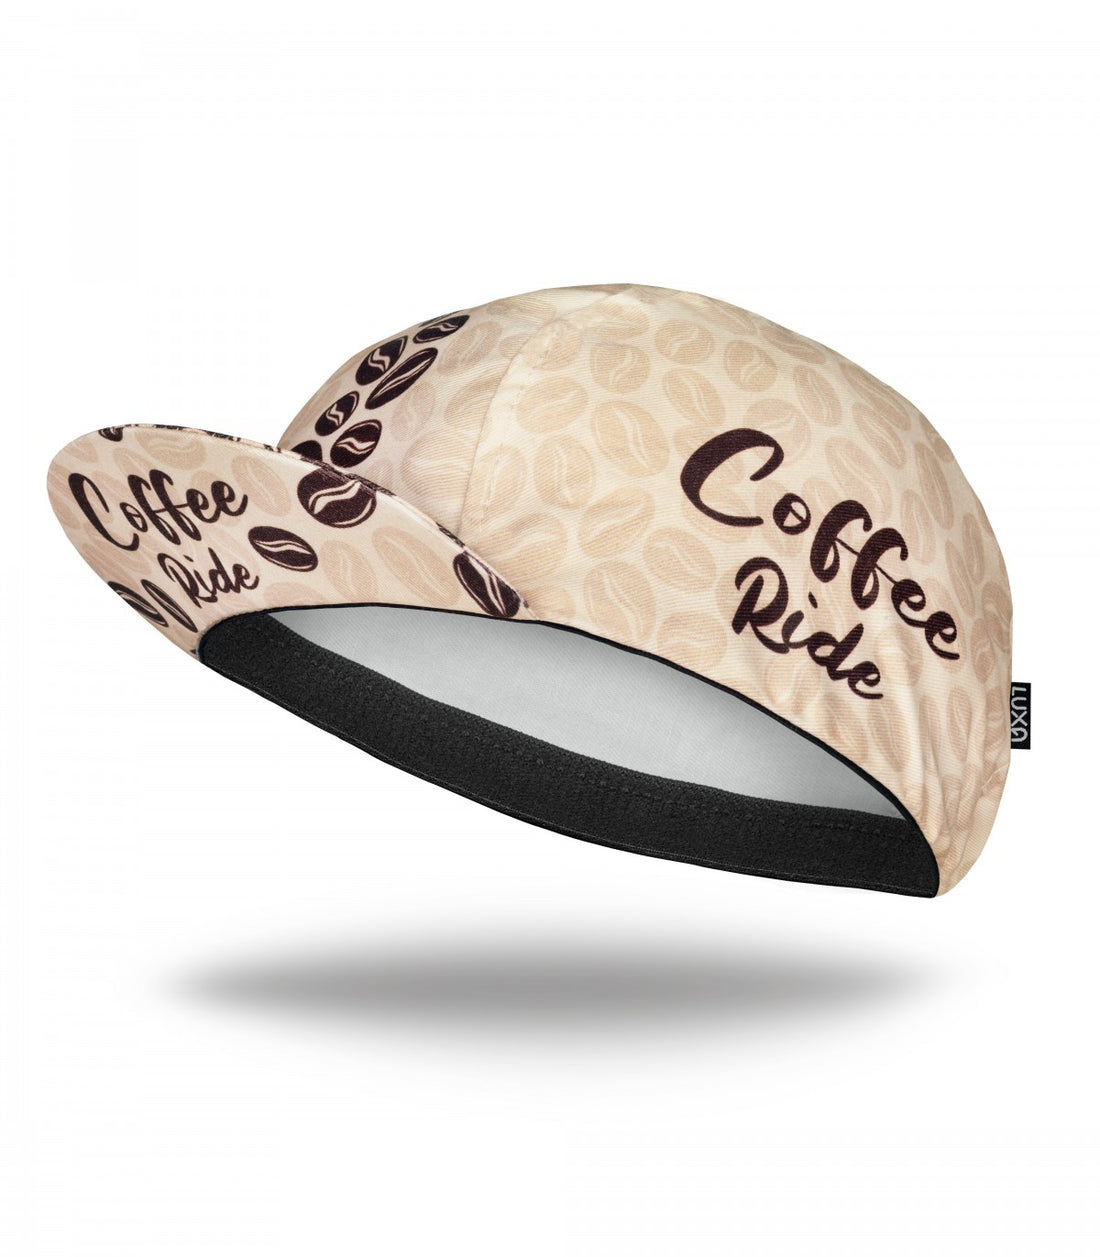 Luxa - Coffee Ride Brown - Cycling Cap